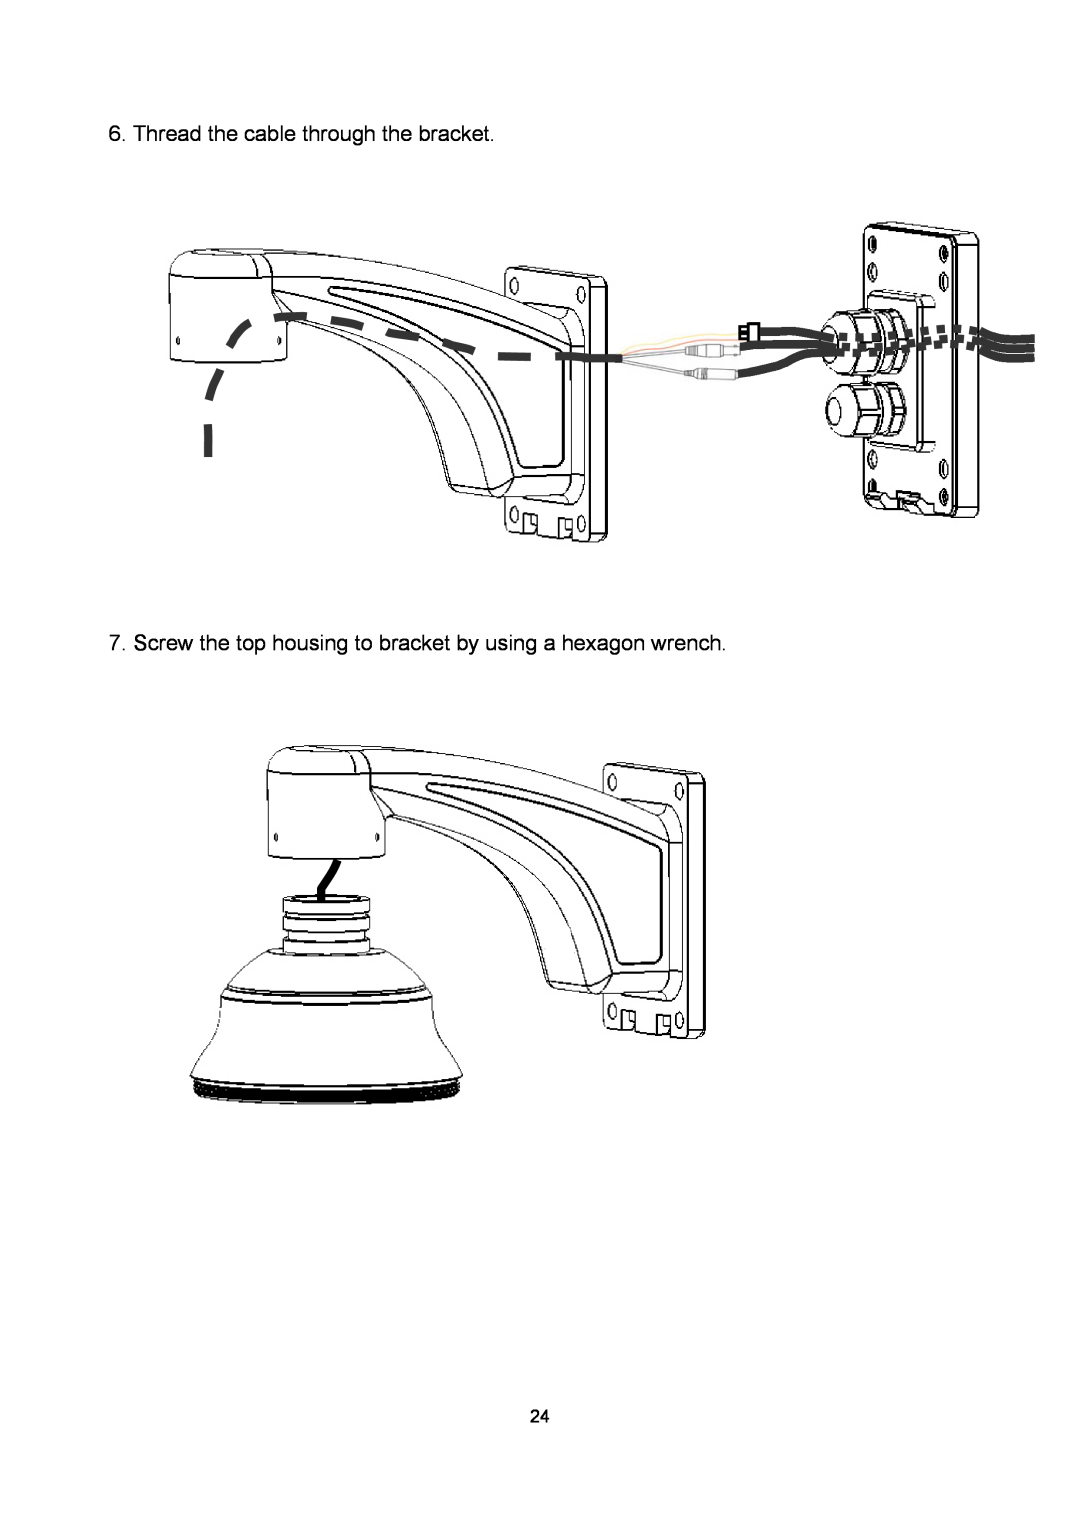 EverFocus EPTZ2700i user manual Thread the cable through the bracket 